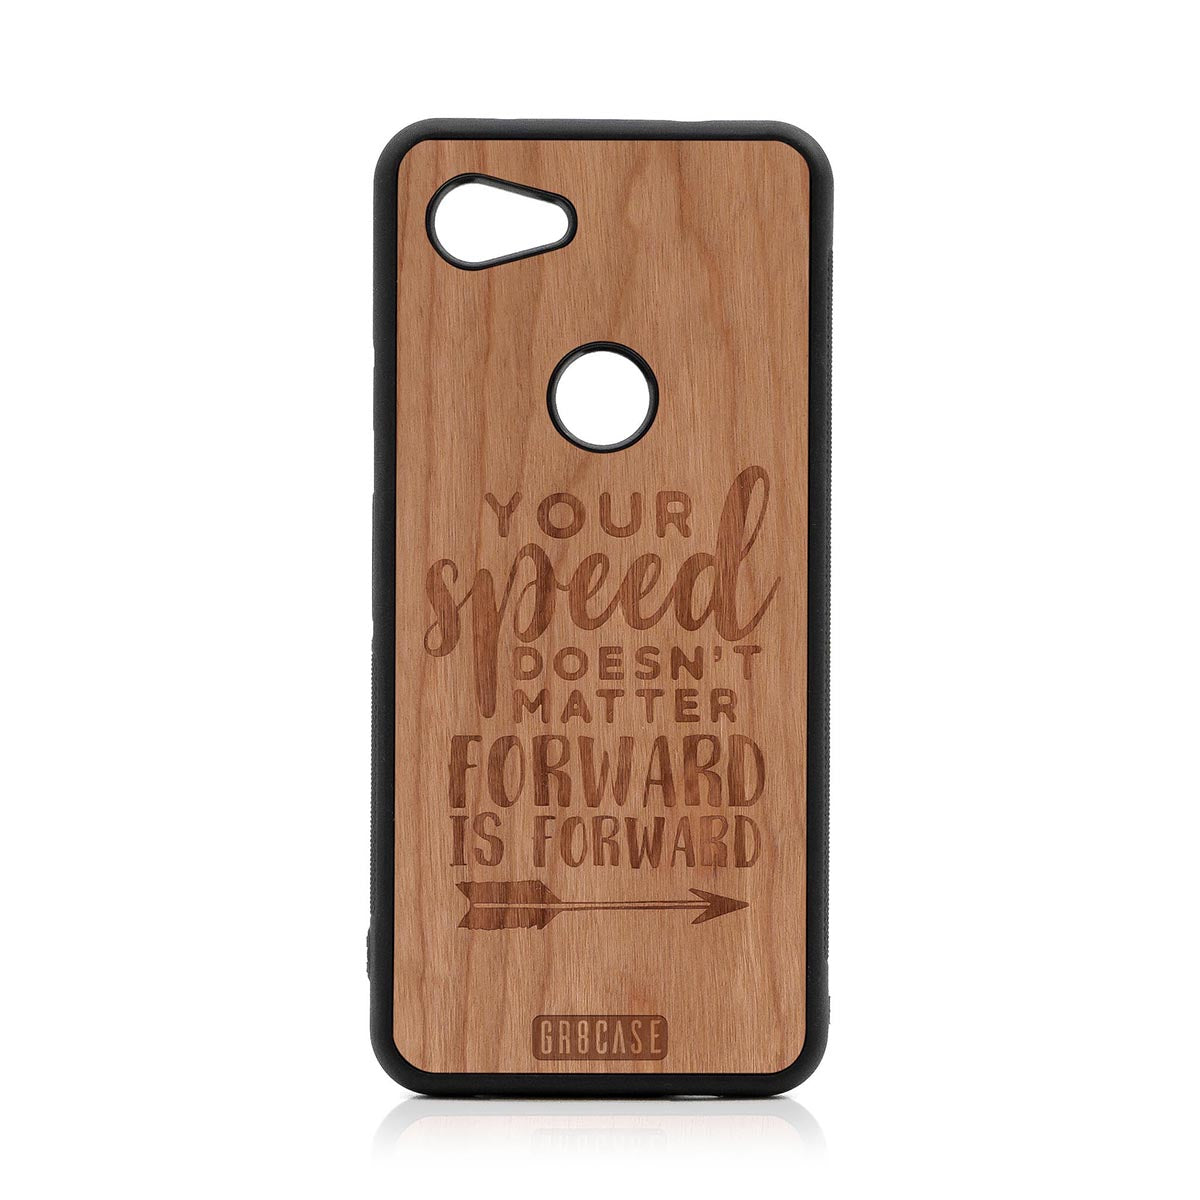 Your Speed Doesn't Matter Forward Is Forward Design Wood Case Google Pixel 3A XL